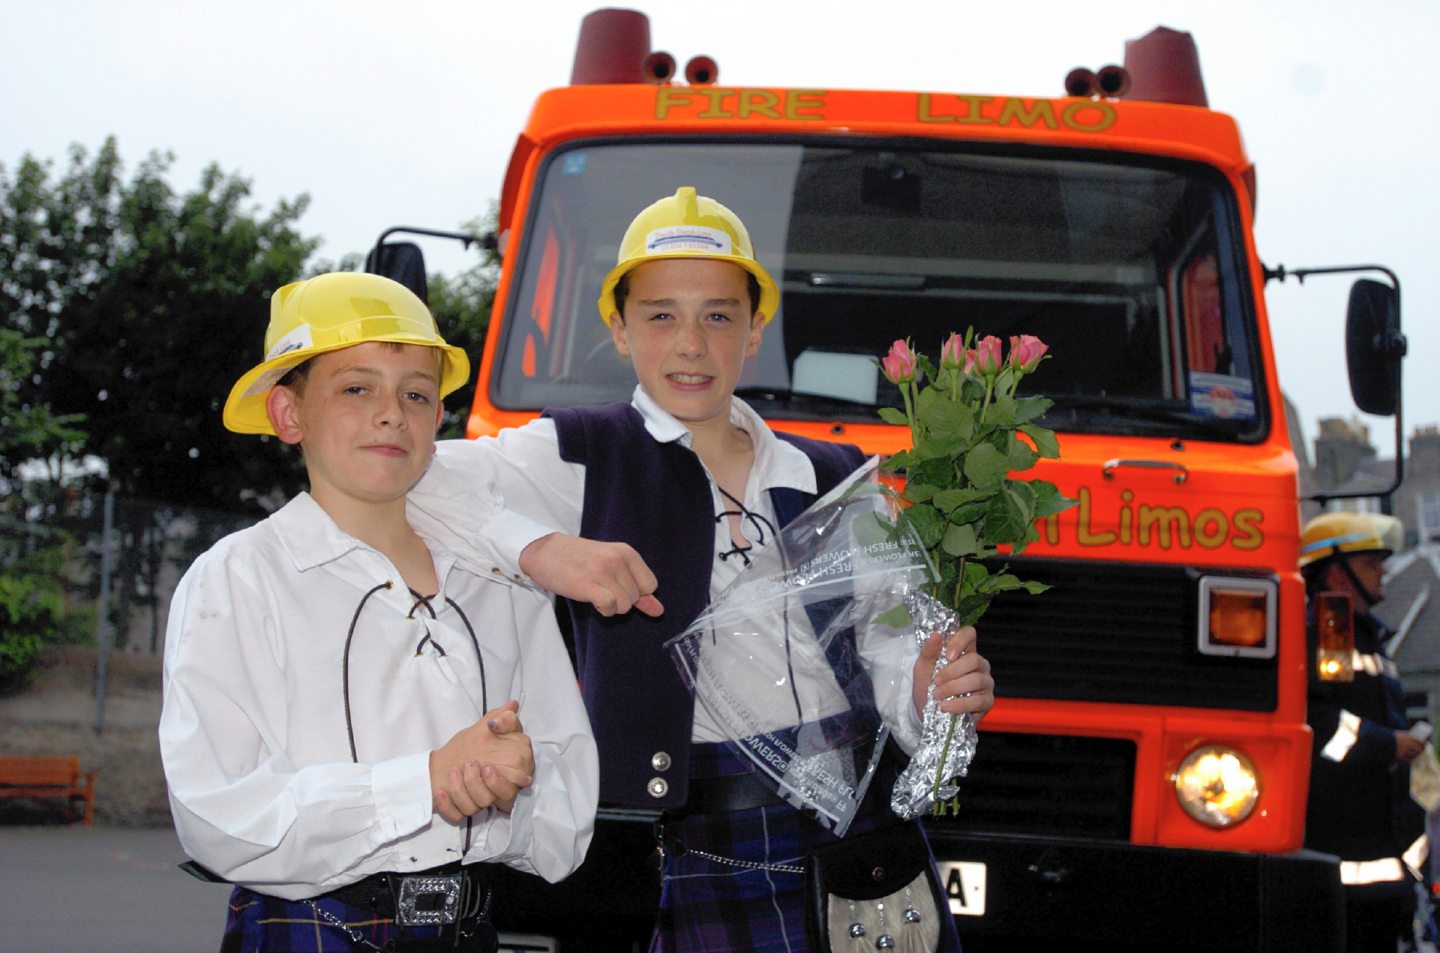 Jamie Moor and Keith Morrison in front of the fire engine they arrived to the Walker Road prom in in 2005.